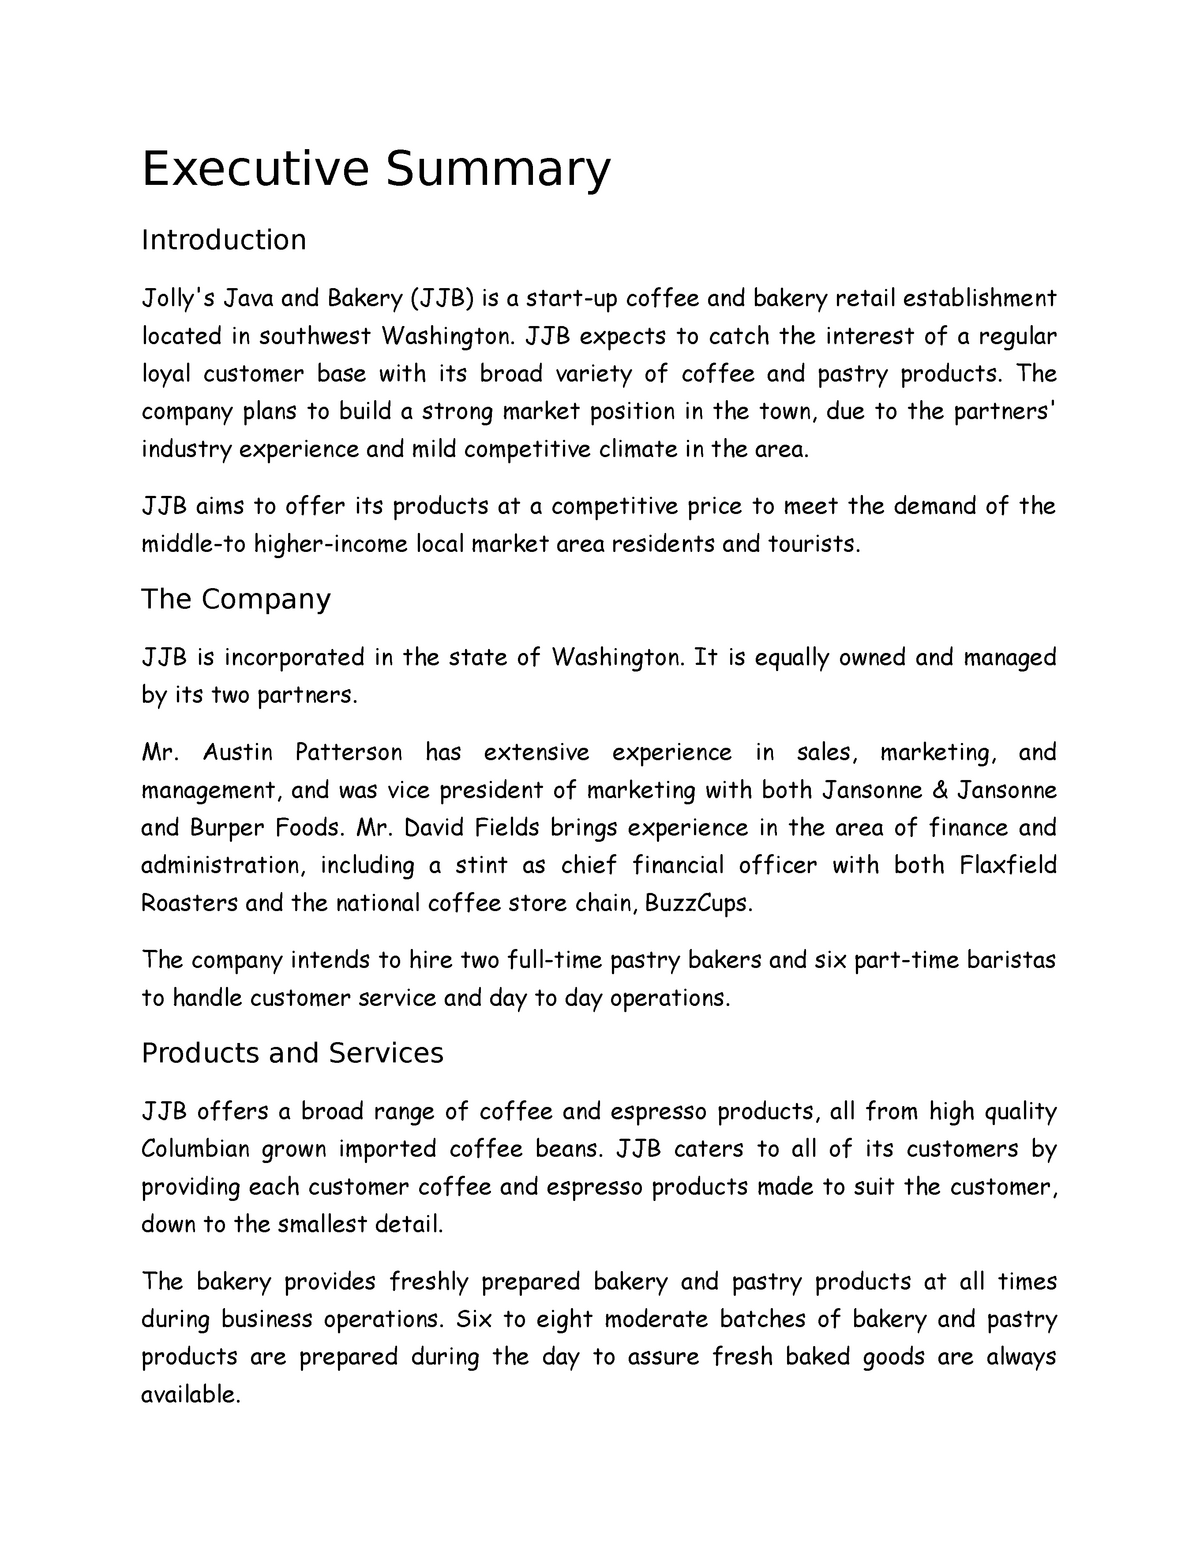 sample of executive summary of restaurant business plan